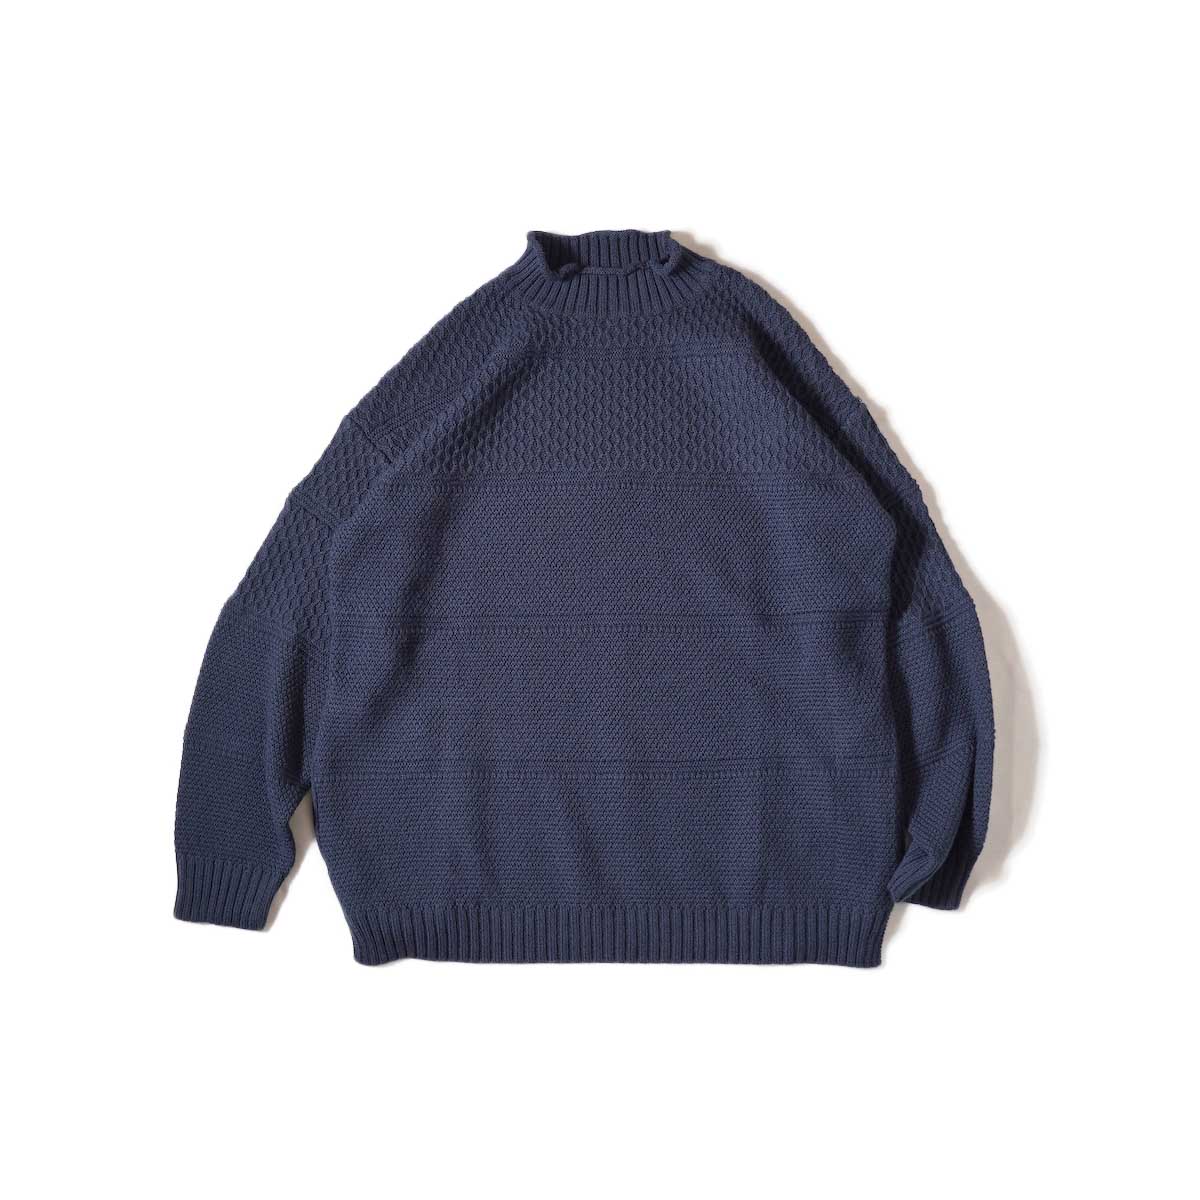 CURLY / BIG SILHOUETTE WAFFLE P/O KNIT (Navy)